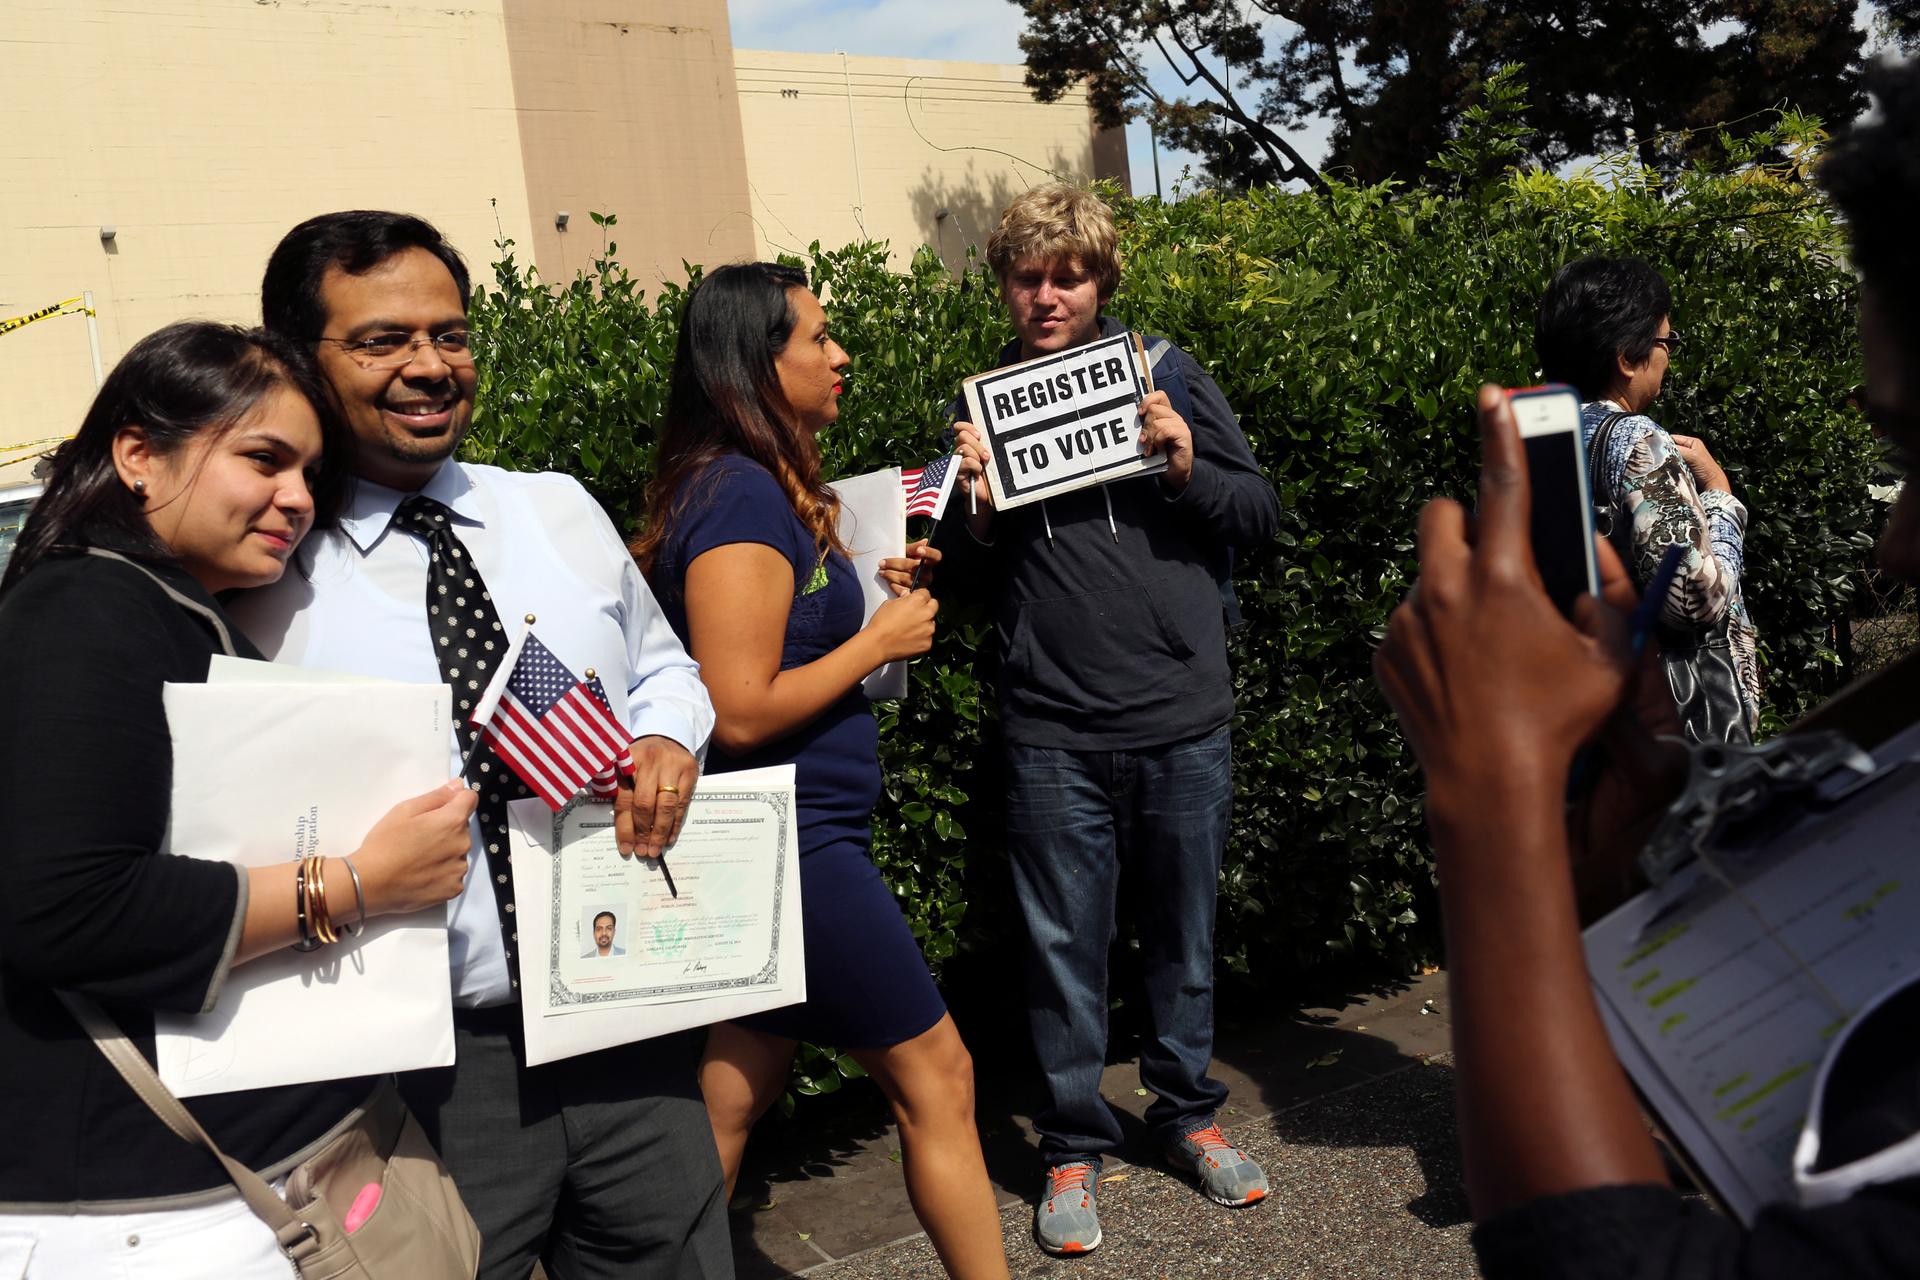 A man holds a voter registration sign while a couple has a souvenir photograph taken following a US Citizenship and Immigration Services ceremony in Oakland, Californiam on August 13, 2014. 